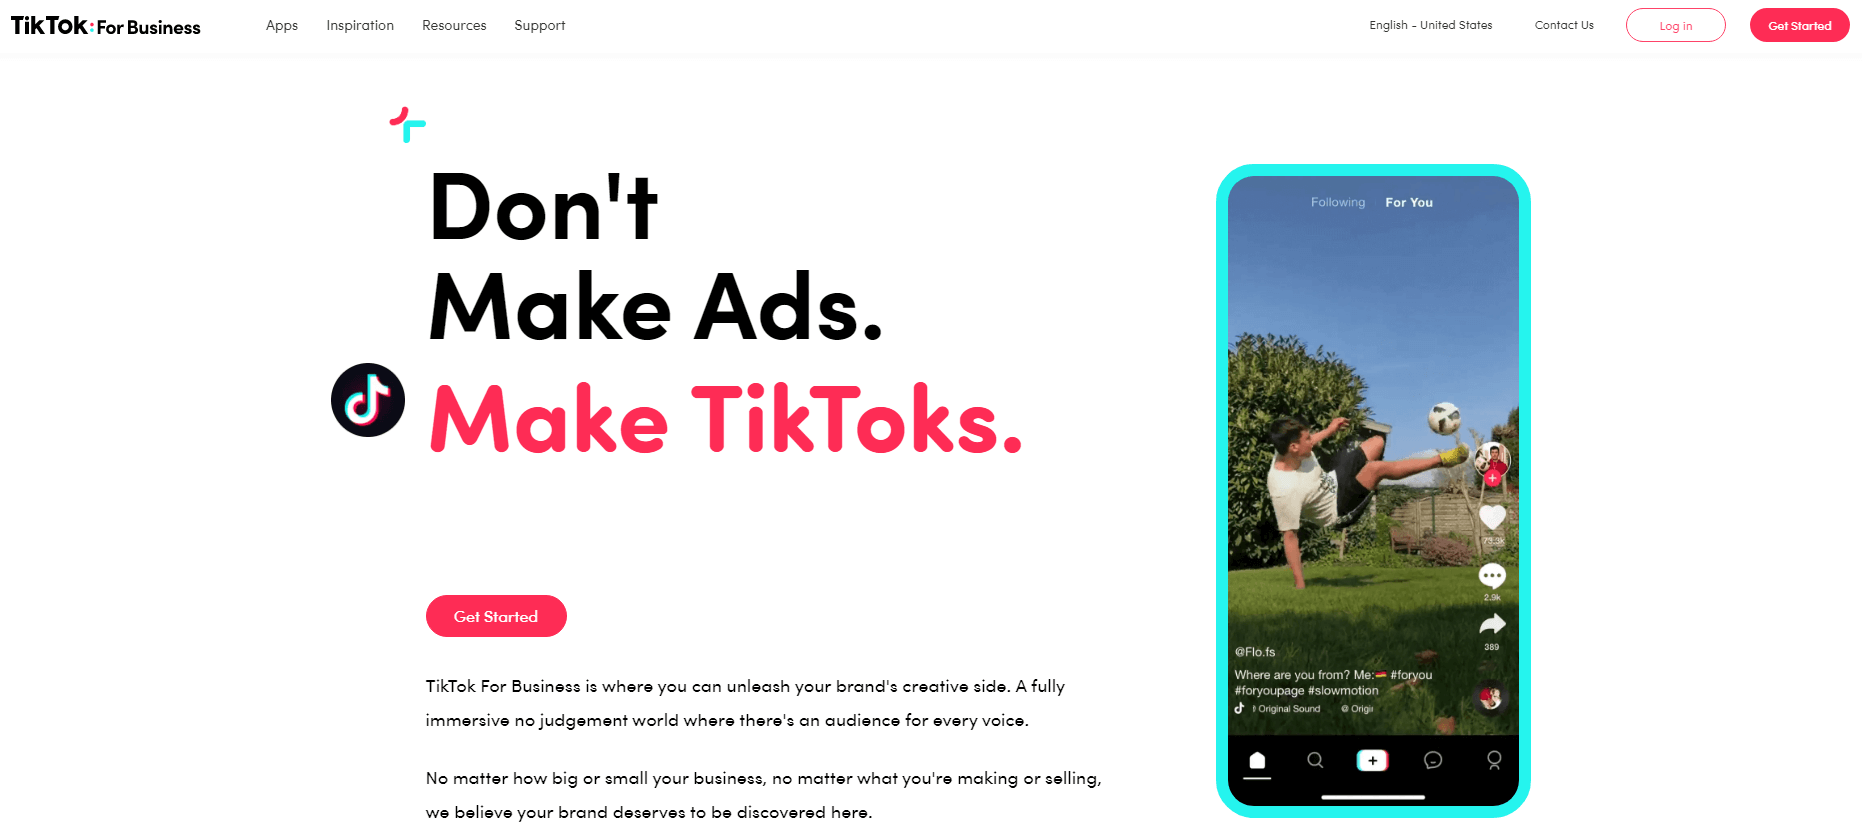 The TikTok for Business homepage.